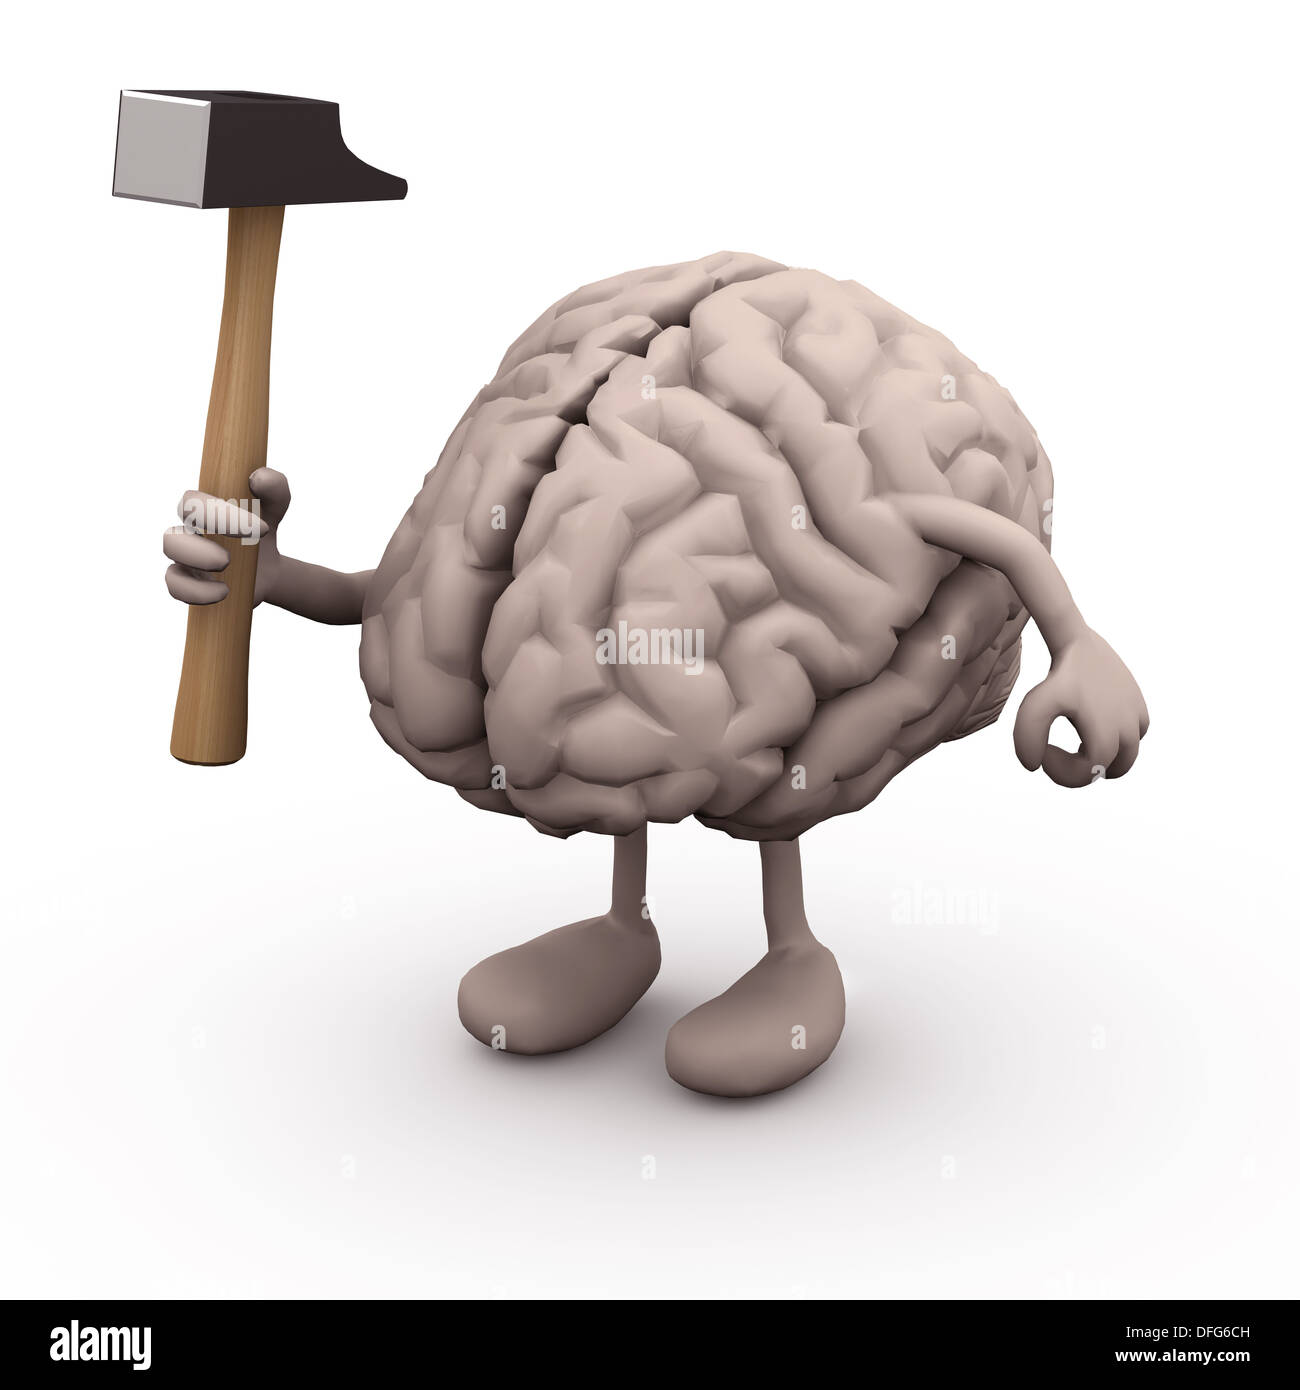 human brain with arms and legs and hammer on hand, 3d illustration Stock Photo